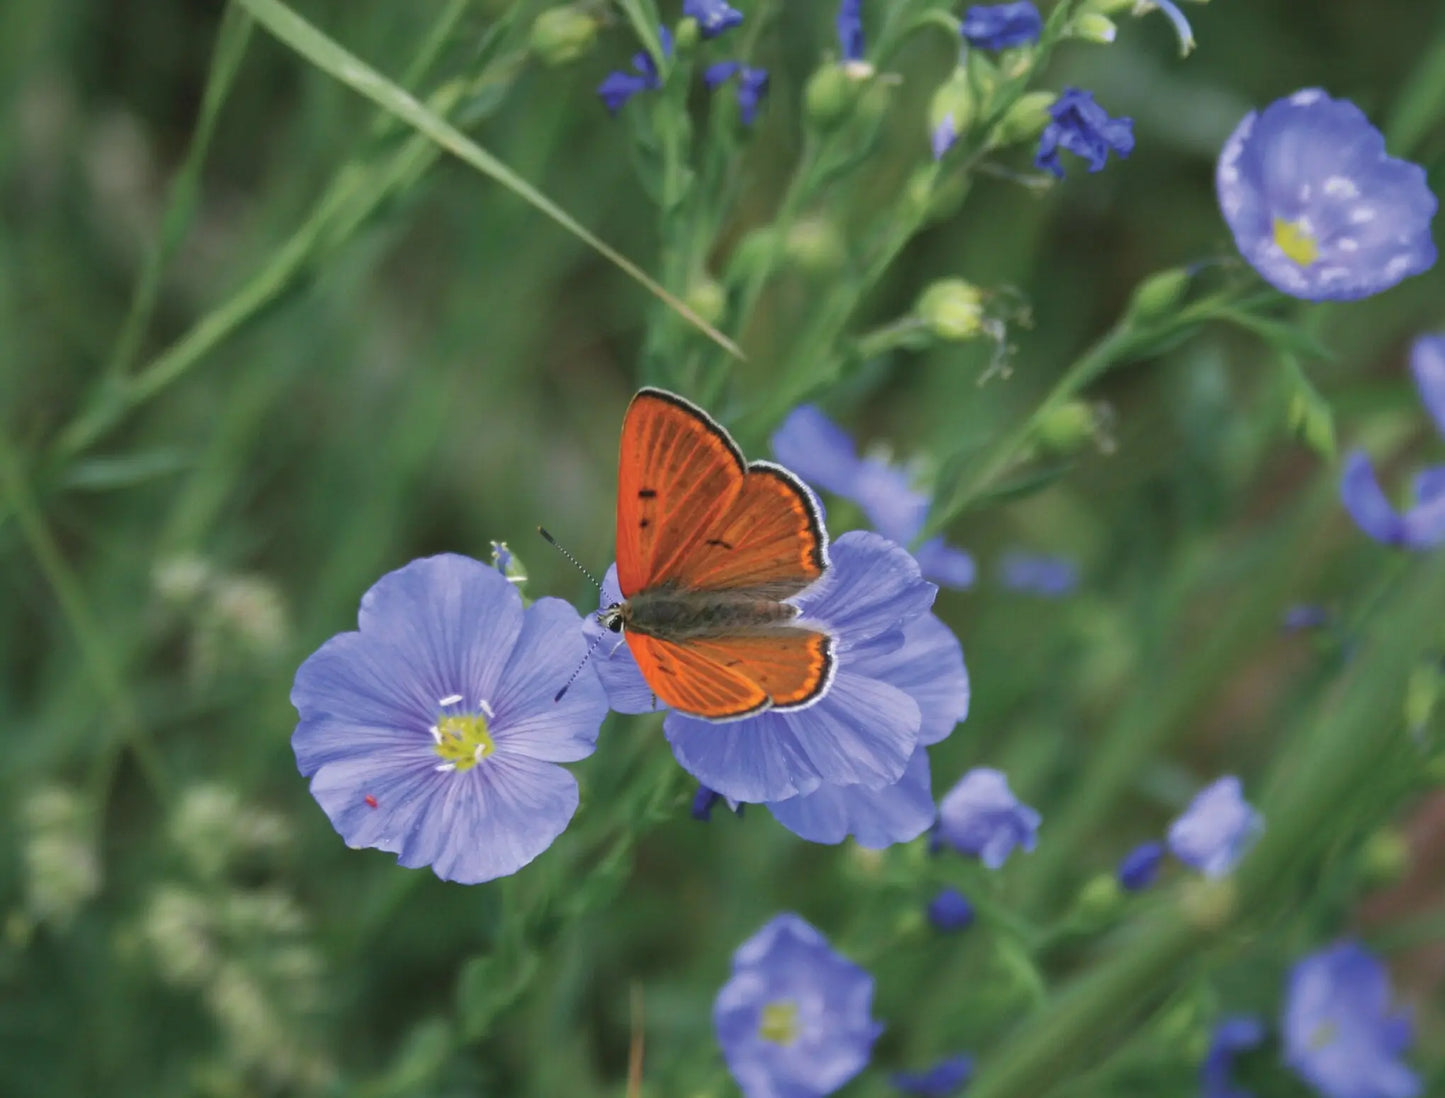 Butterfly Blue Flax Nature Note Cards Mozaic Studio